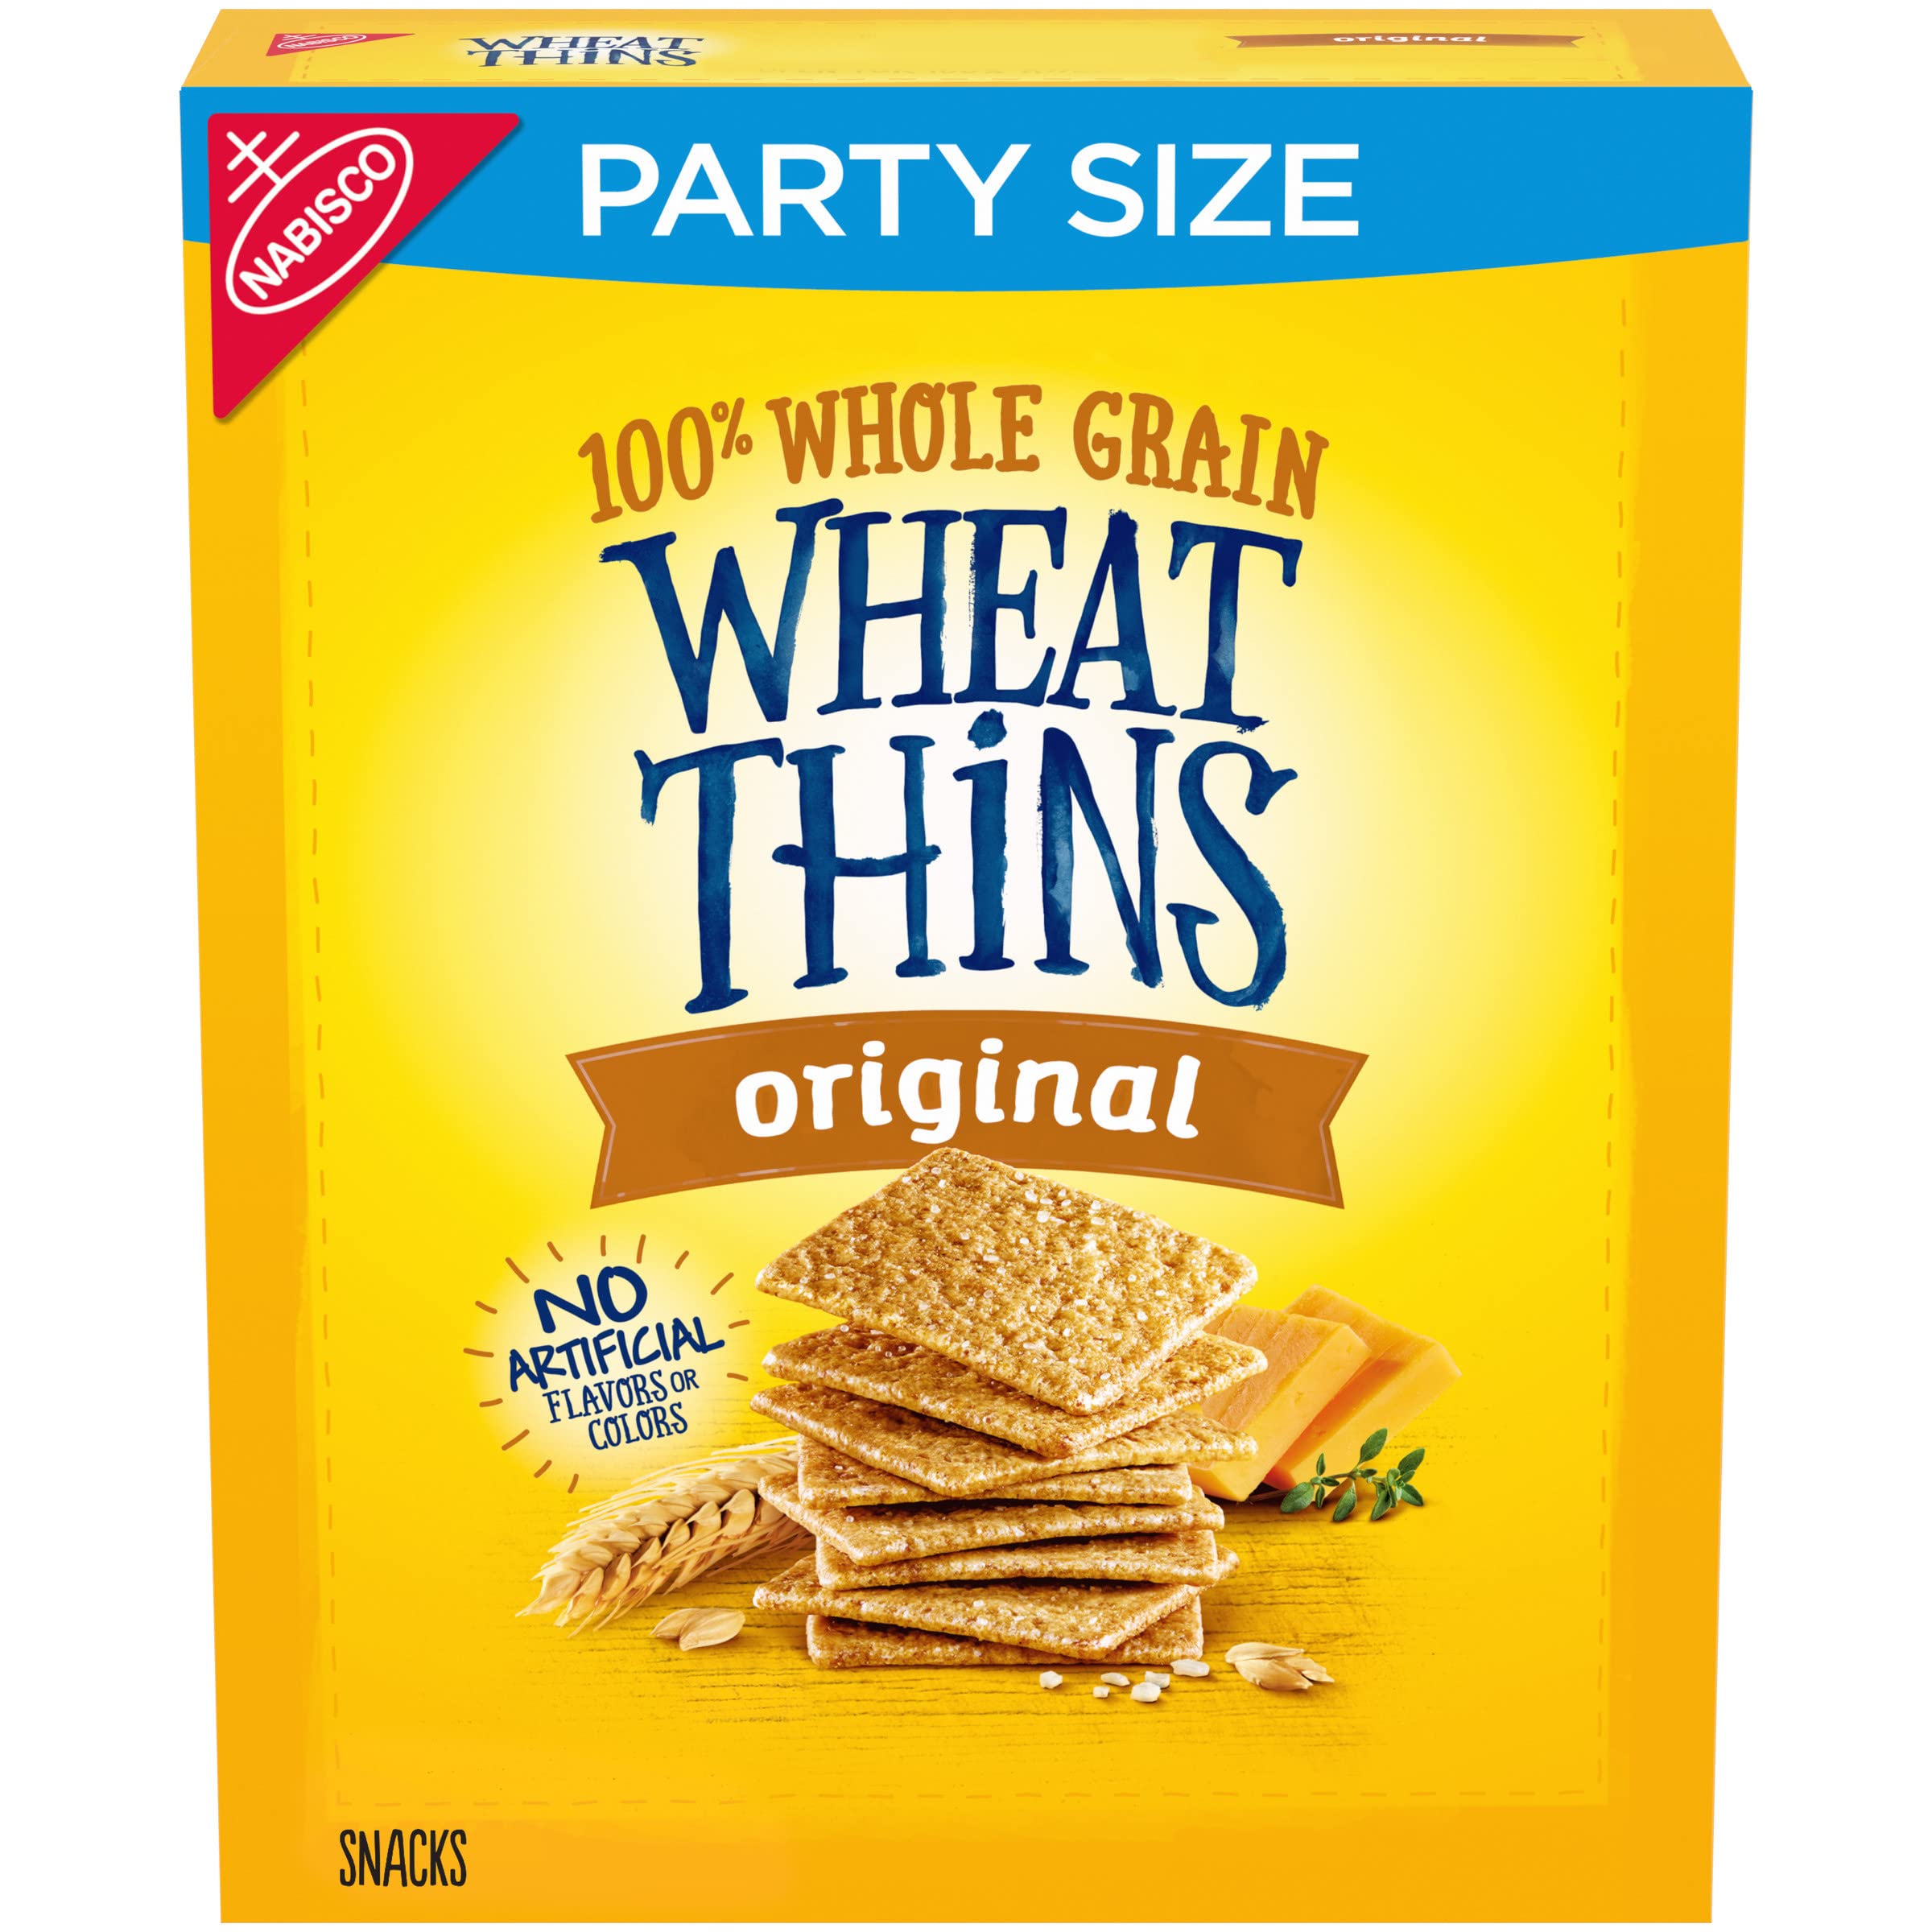 Wheat Thins Original Whole Grain Wheat Crackers, Party Size, 20 oz Box [Subscribe & Save] $2.46